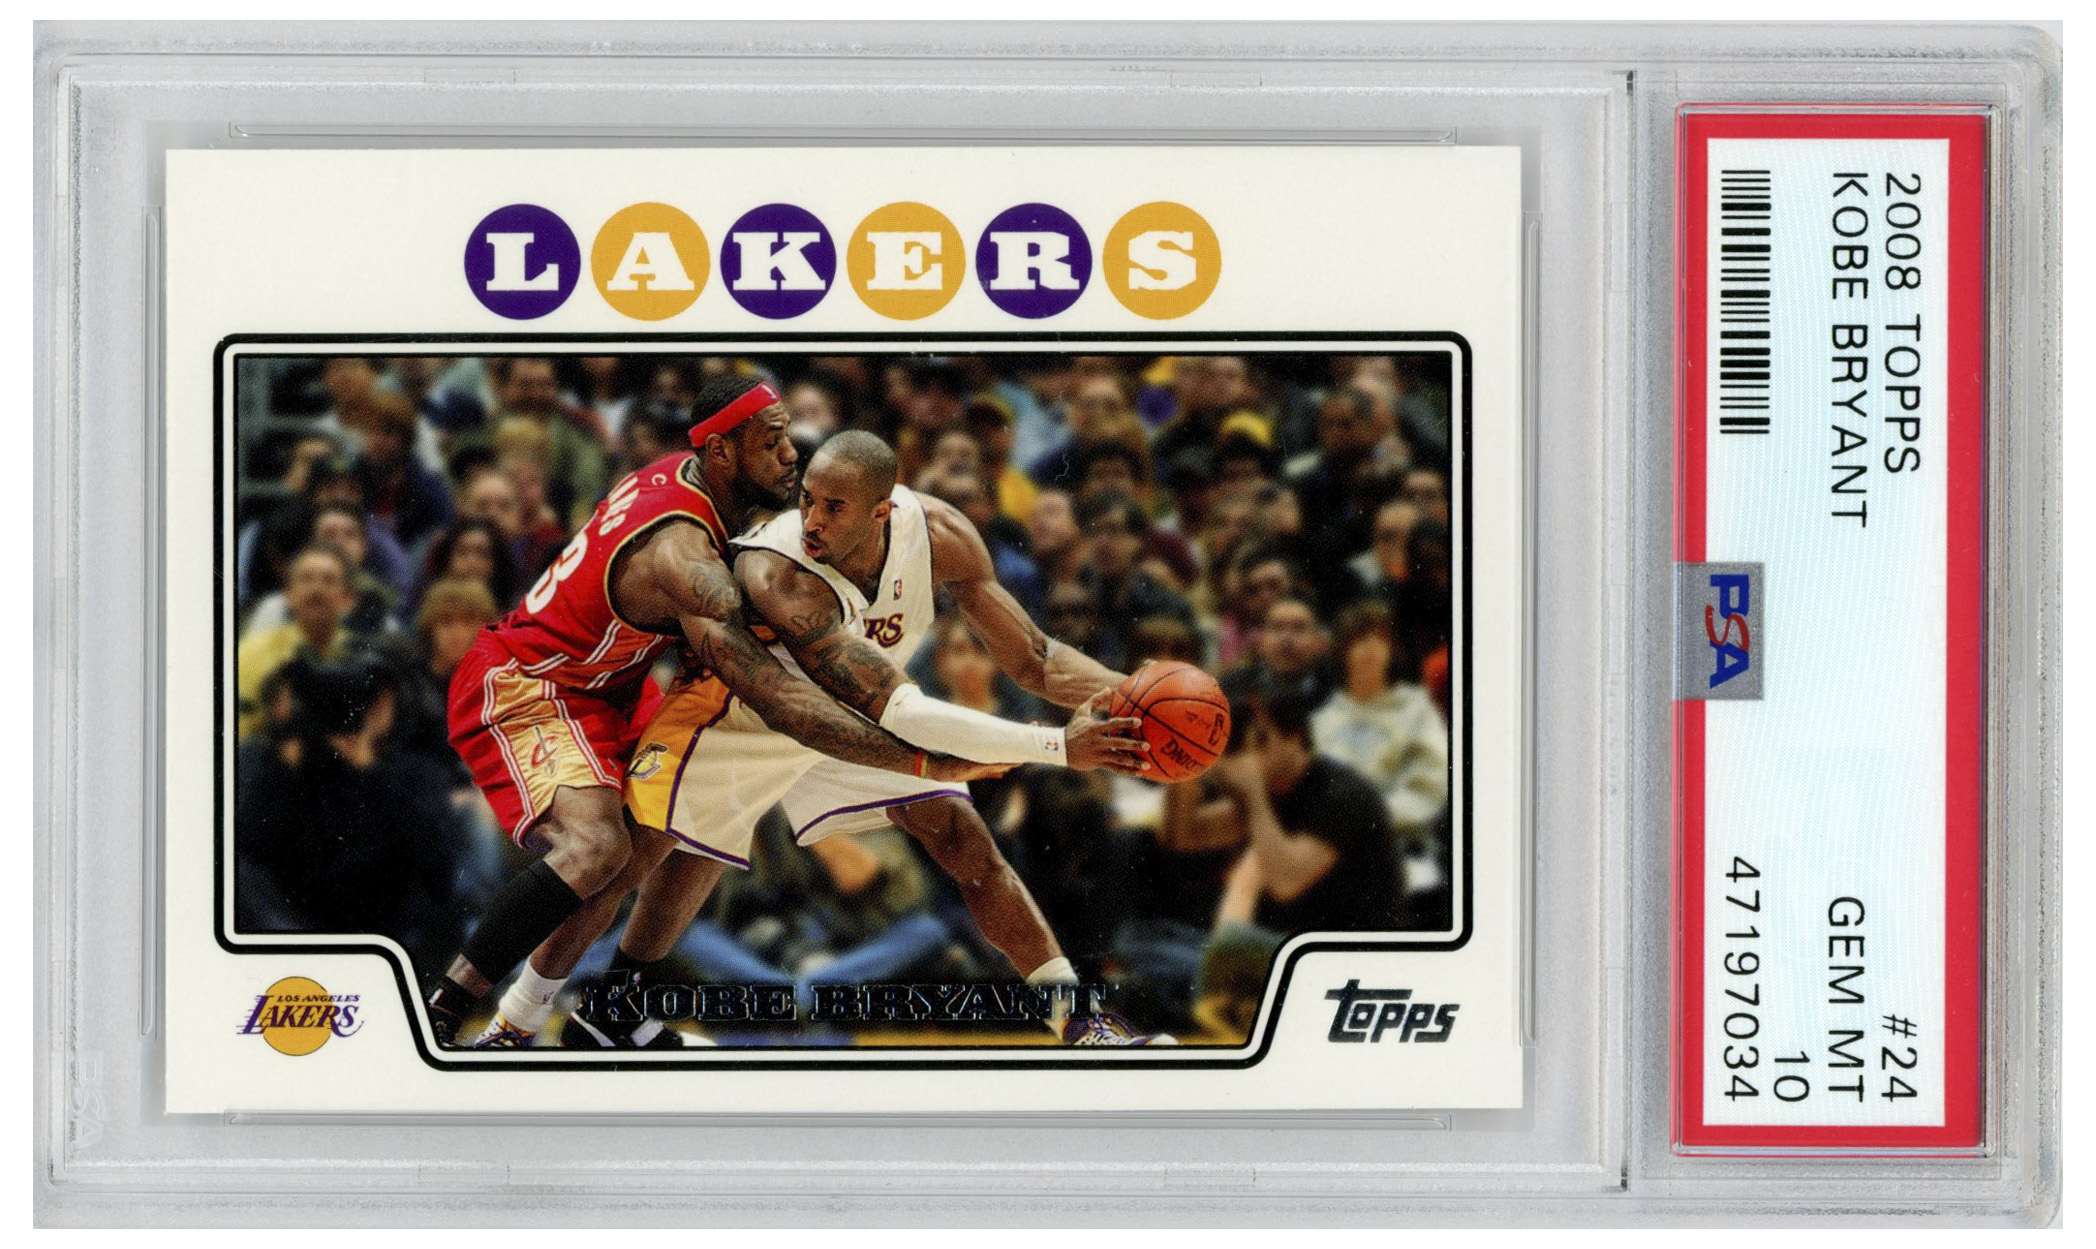 Sell or Auction Your 2008 Topps Kobe Bryant #24 PSA 10 Basketball Card